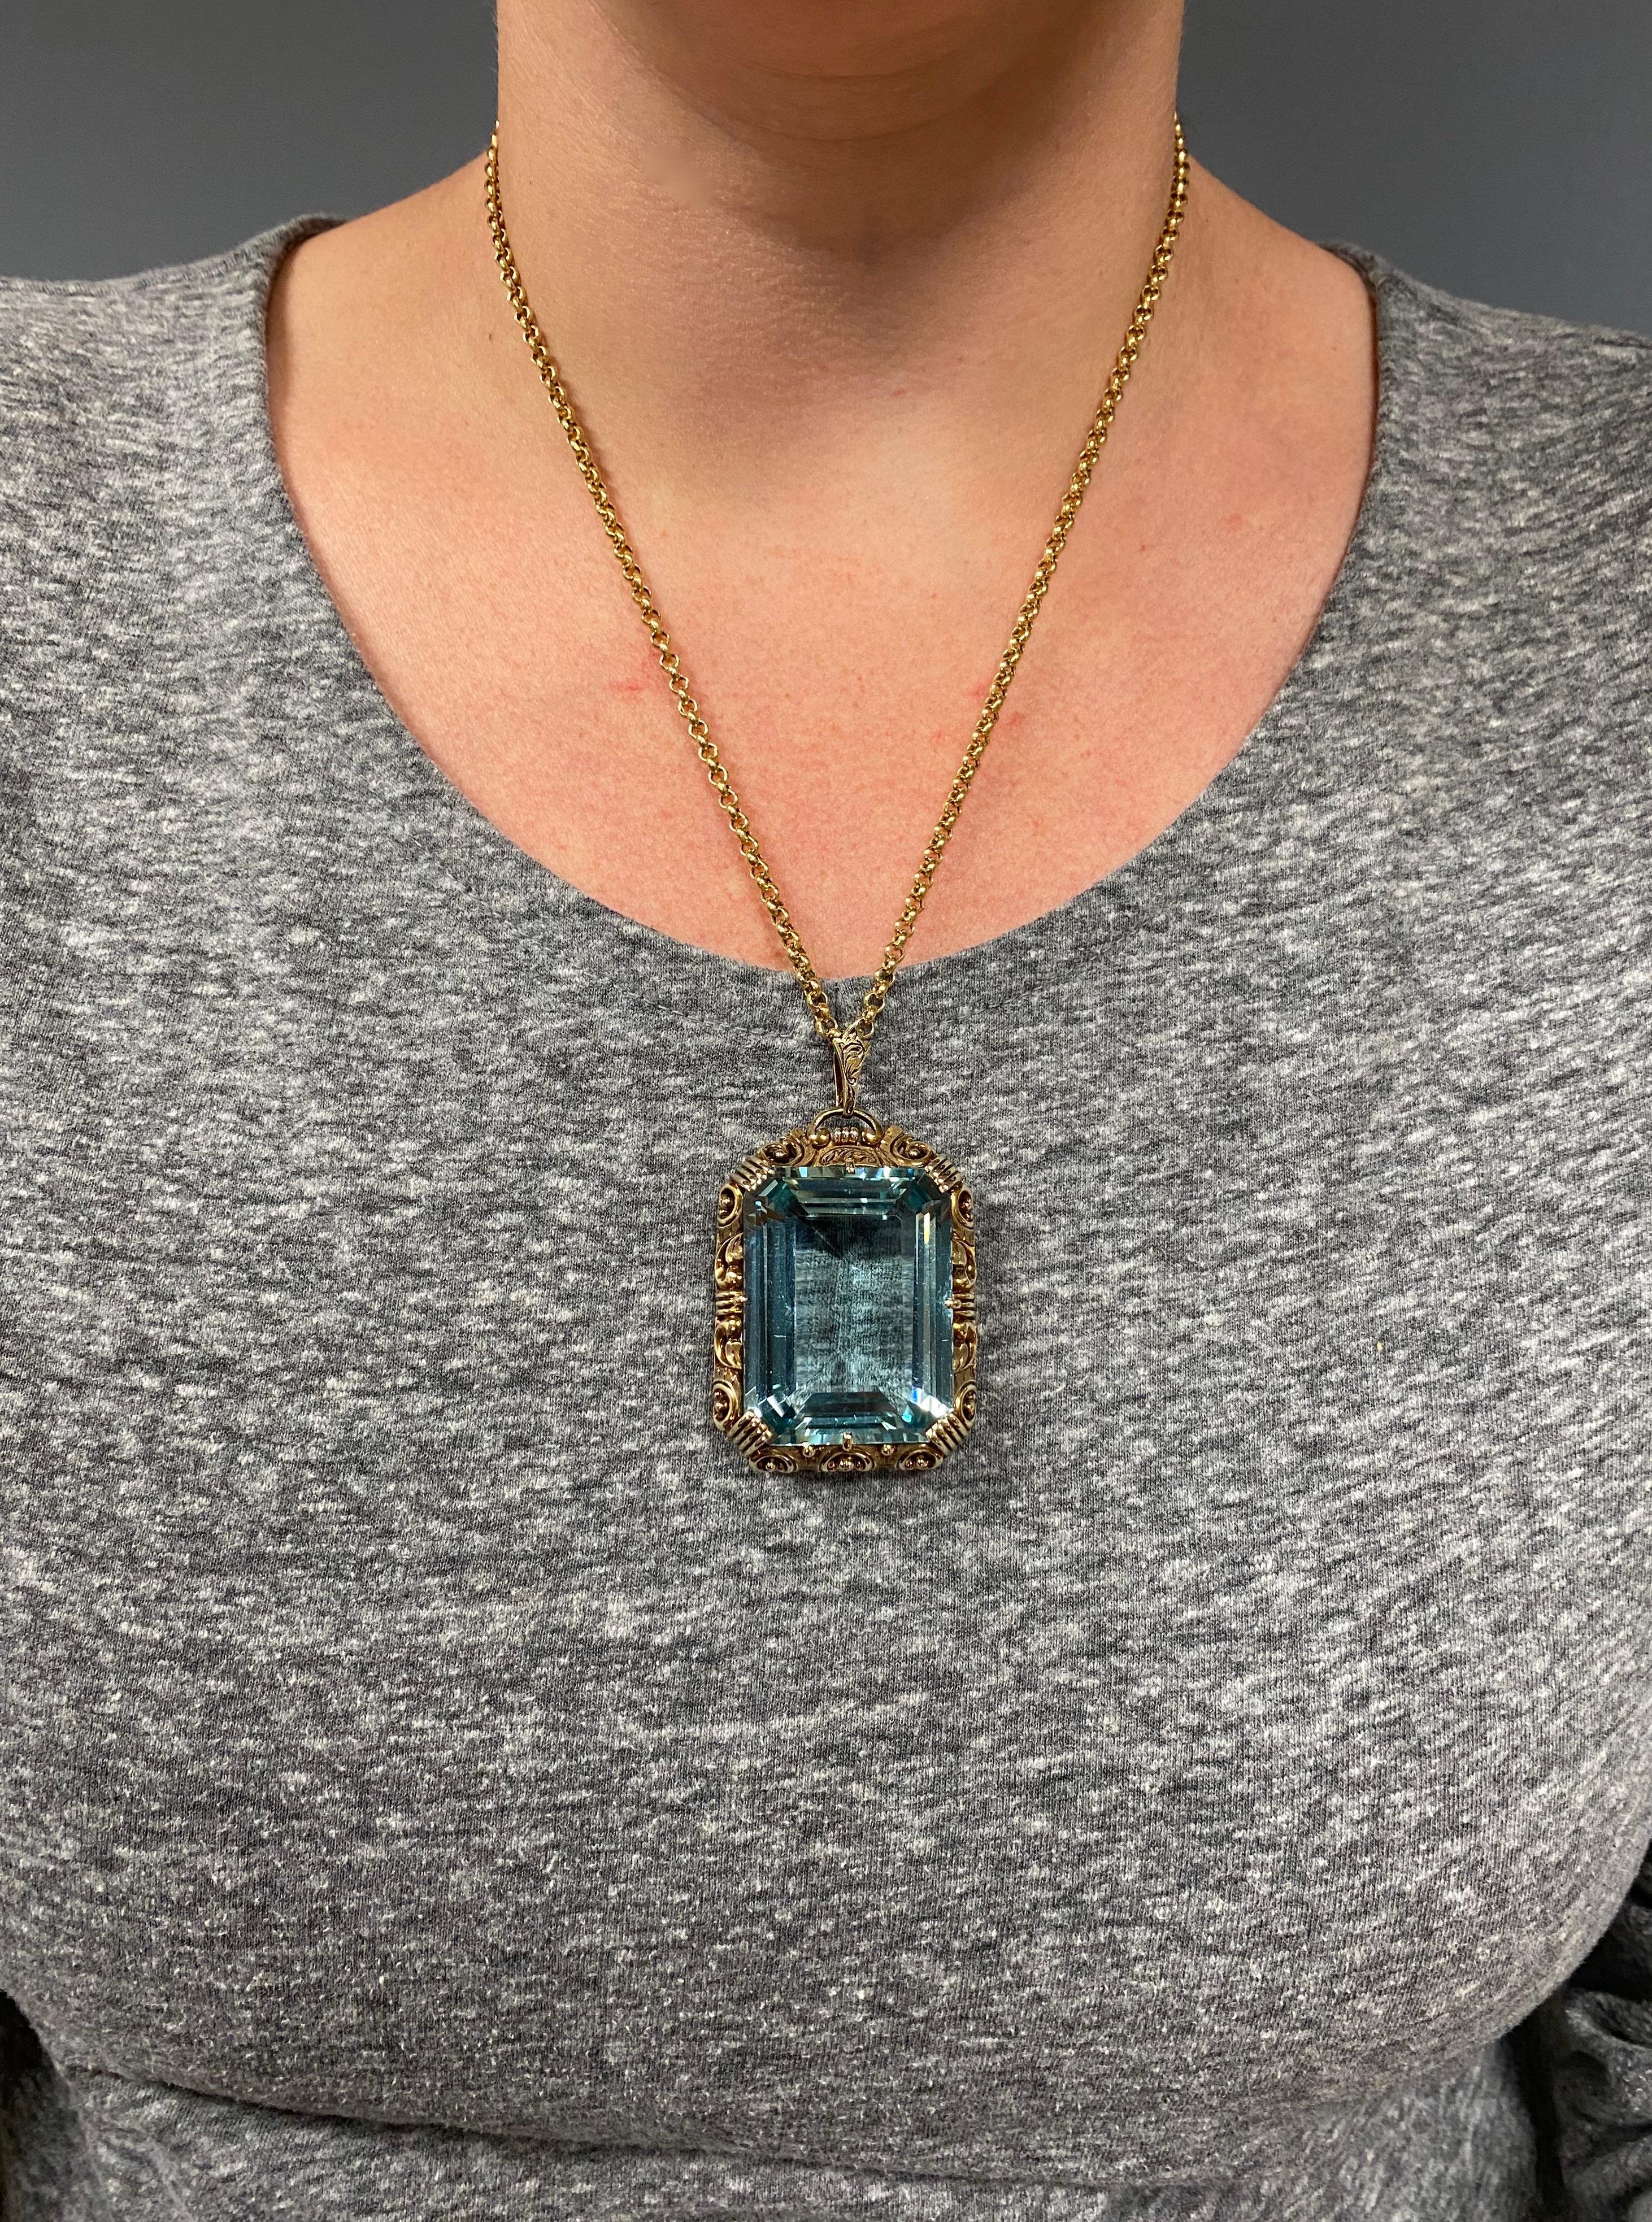 Stunning vintage necklace featuring a large GIA Certified Natural Aquamarine. 

GIA Report # 6214780487
Gemstone: Aquamarine
Gemstone Carat Weight: 36.65 x 27.87 x 13.94mm
Marked/Tested: 